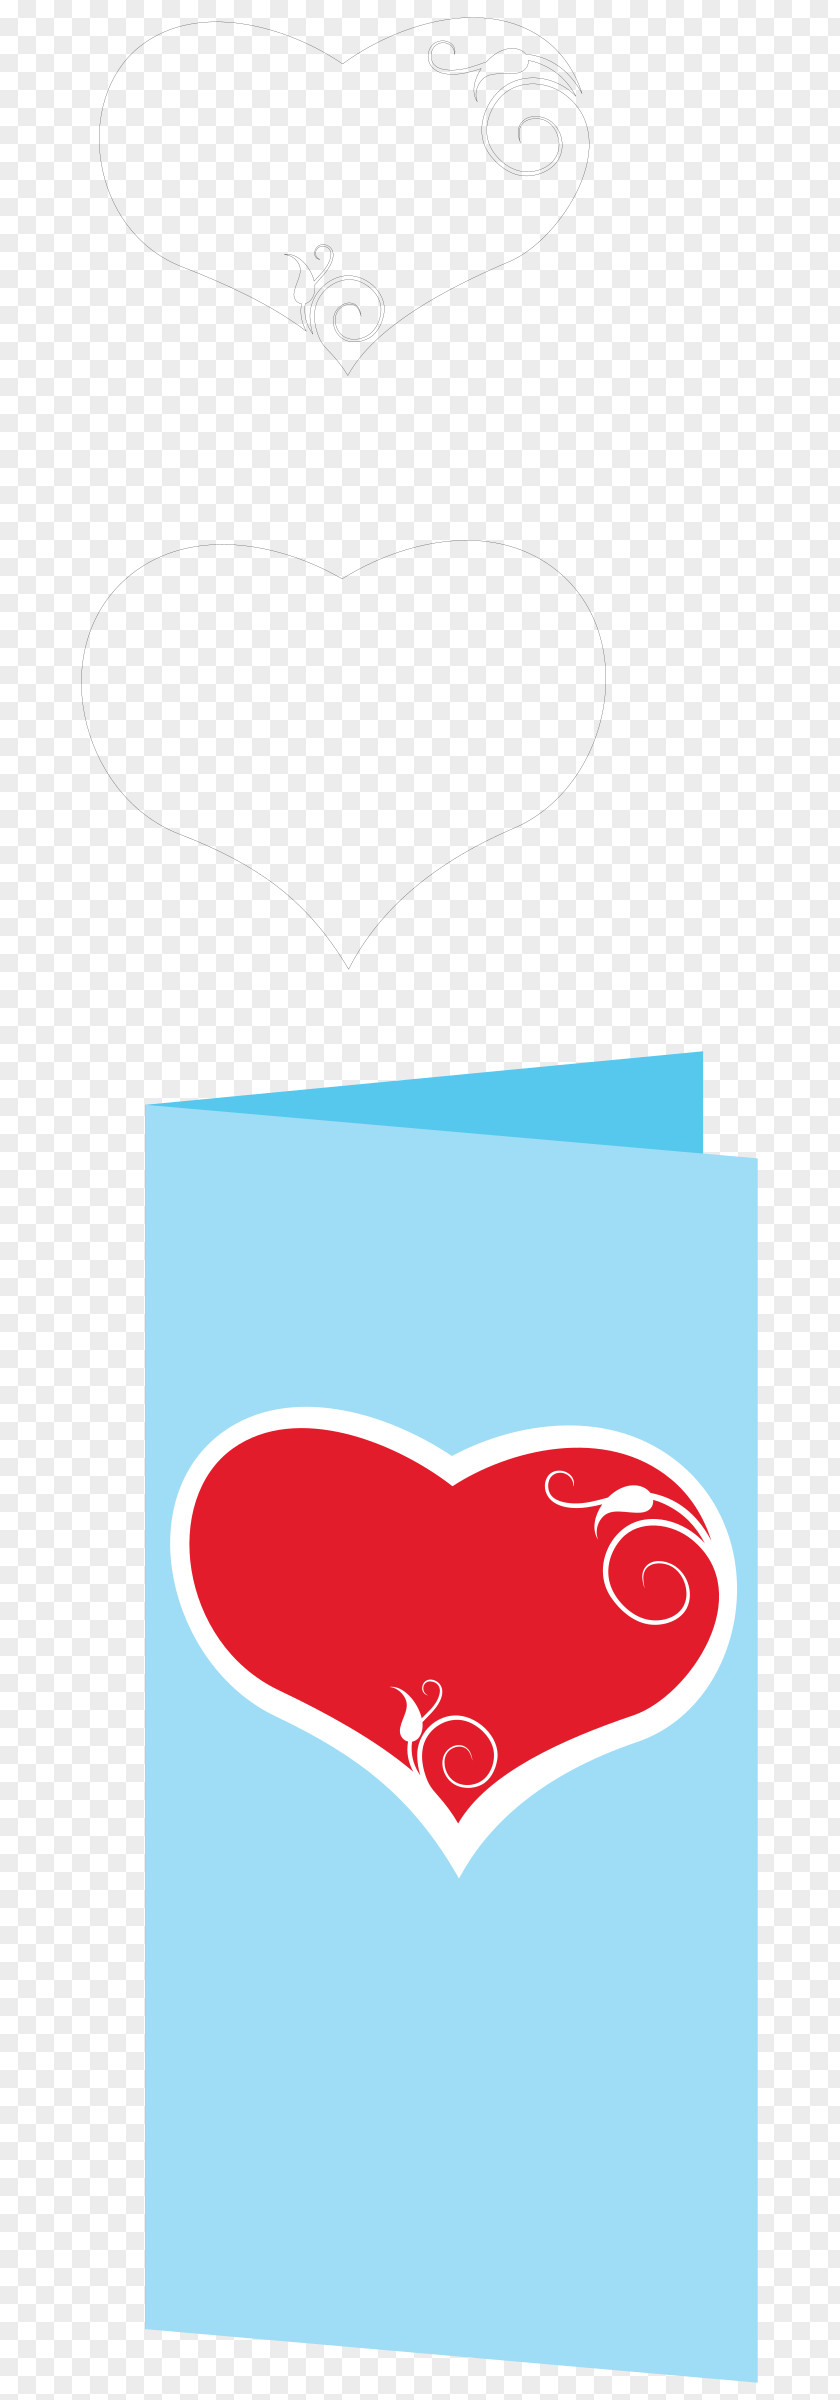 Paper Cut Playing Card Ace Of Hearts Knife King Spades Clip Art PNG